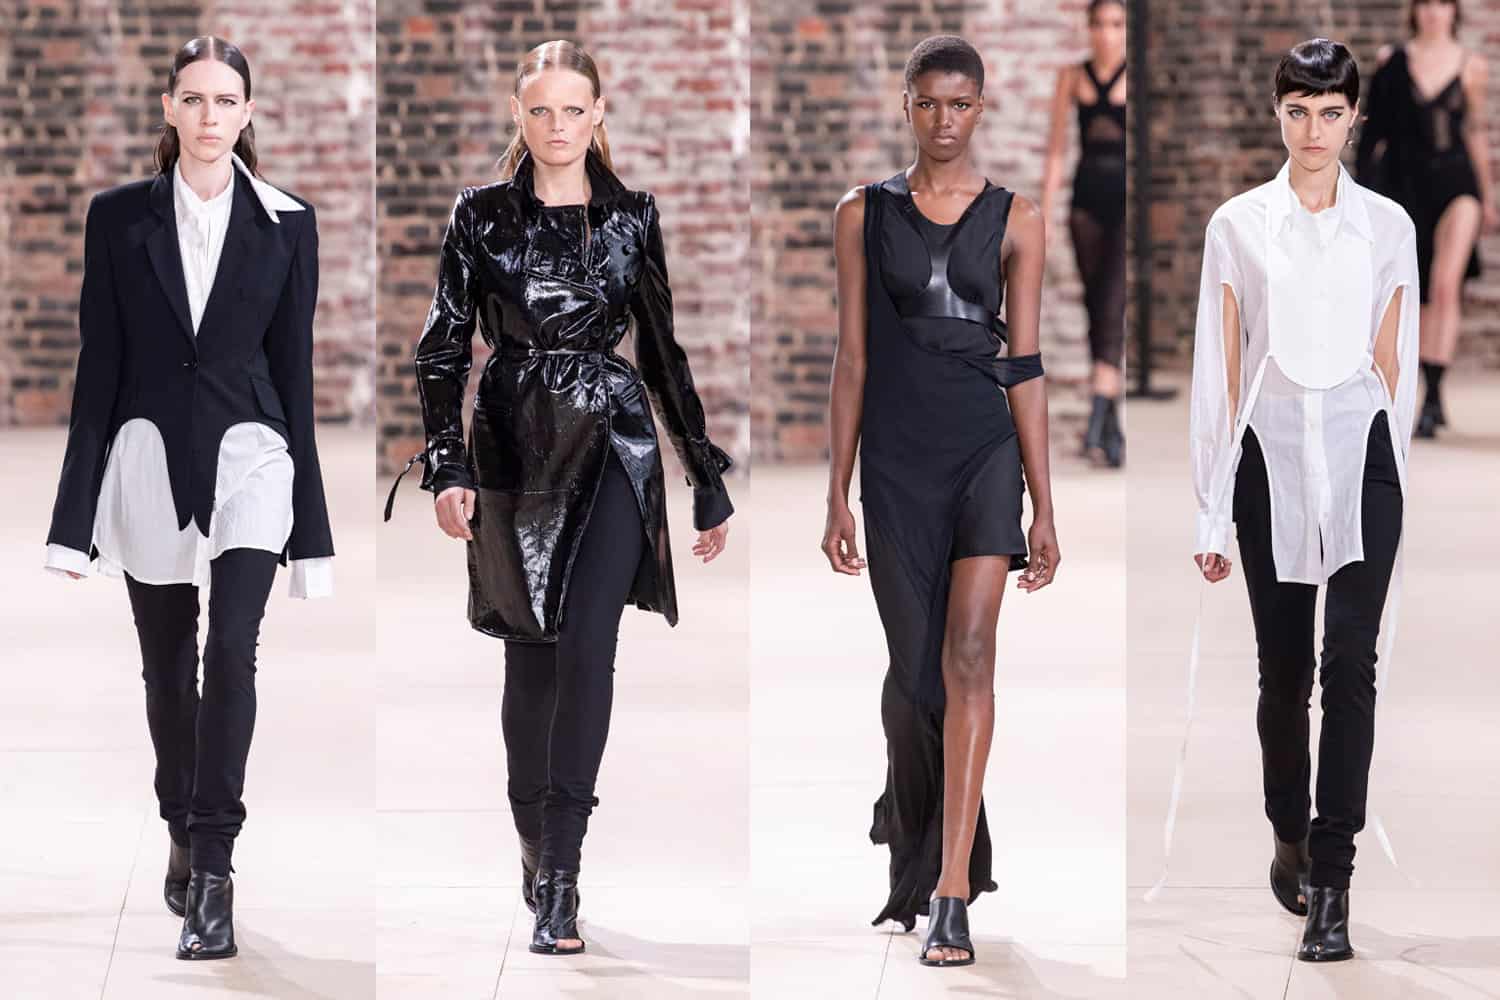 omverwerping Paard dynamisch The Ann Demeulemeester Collection Is Perfect for Office Goths